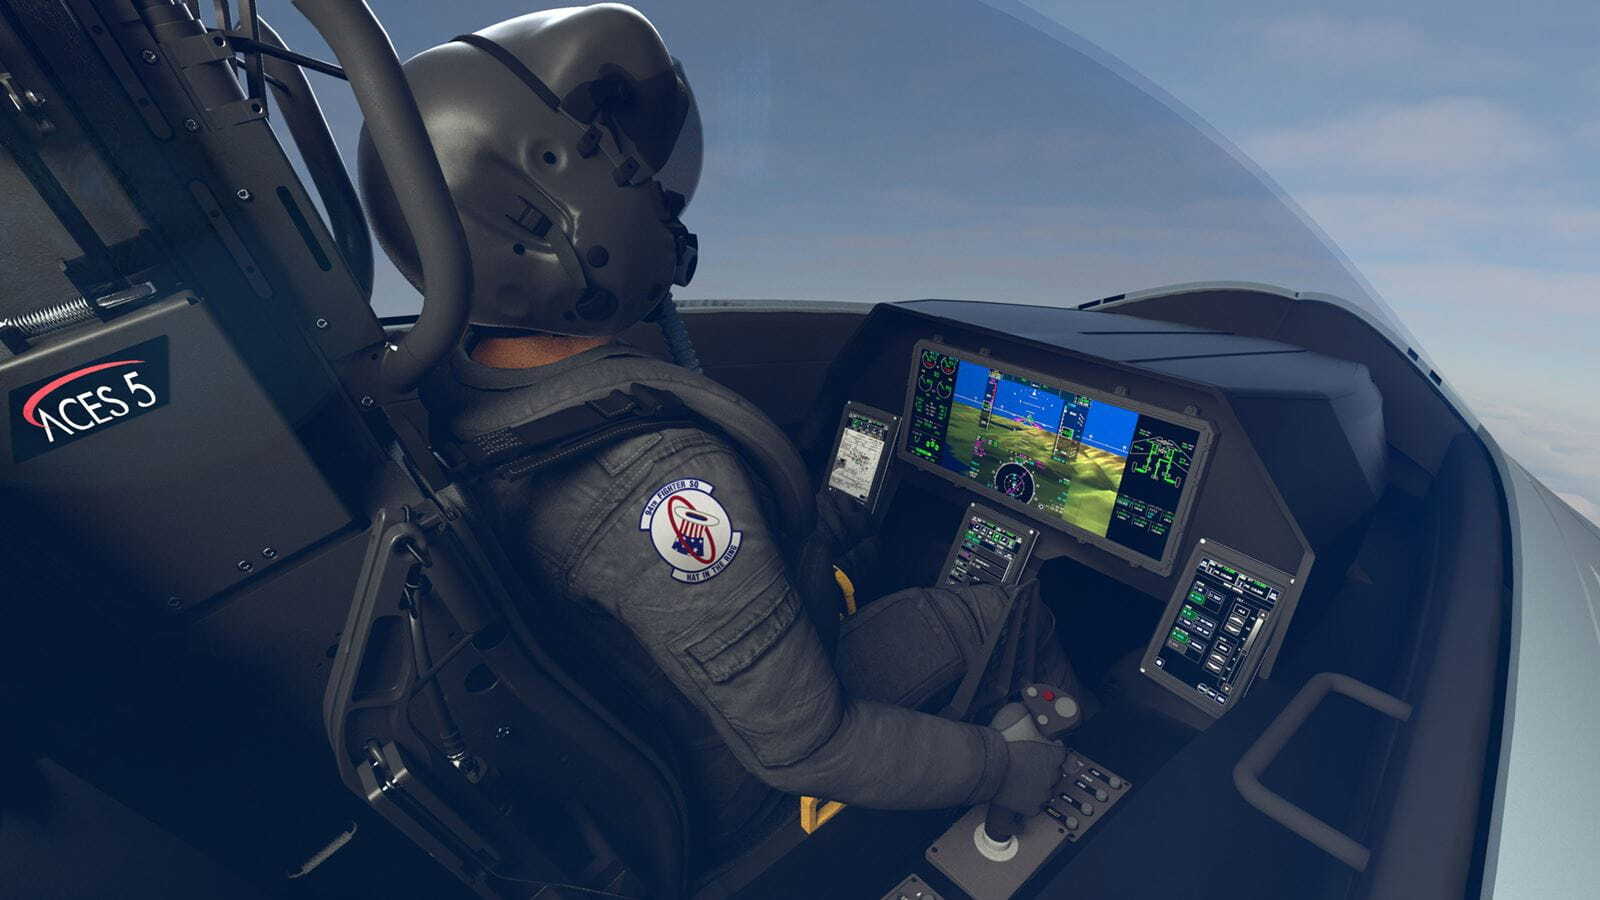 New software developed by Collins Aerospace would calculate the odds of an Air Force fighter pilot accomplishing their mission based on threats and assets, a skill very similar to the Star Wars droid C-3PO. (Collins Aerospace)